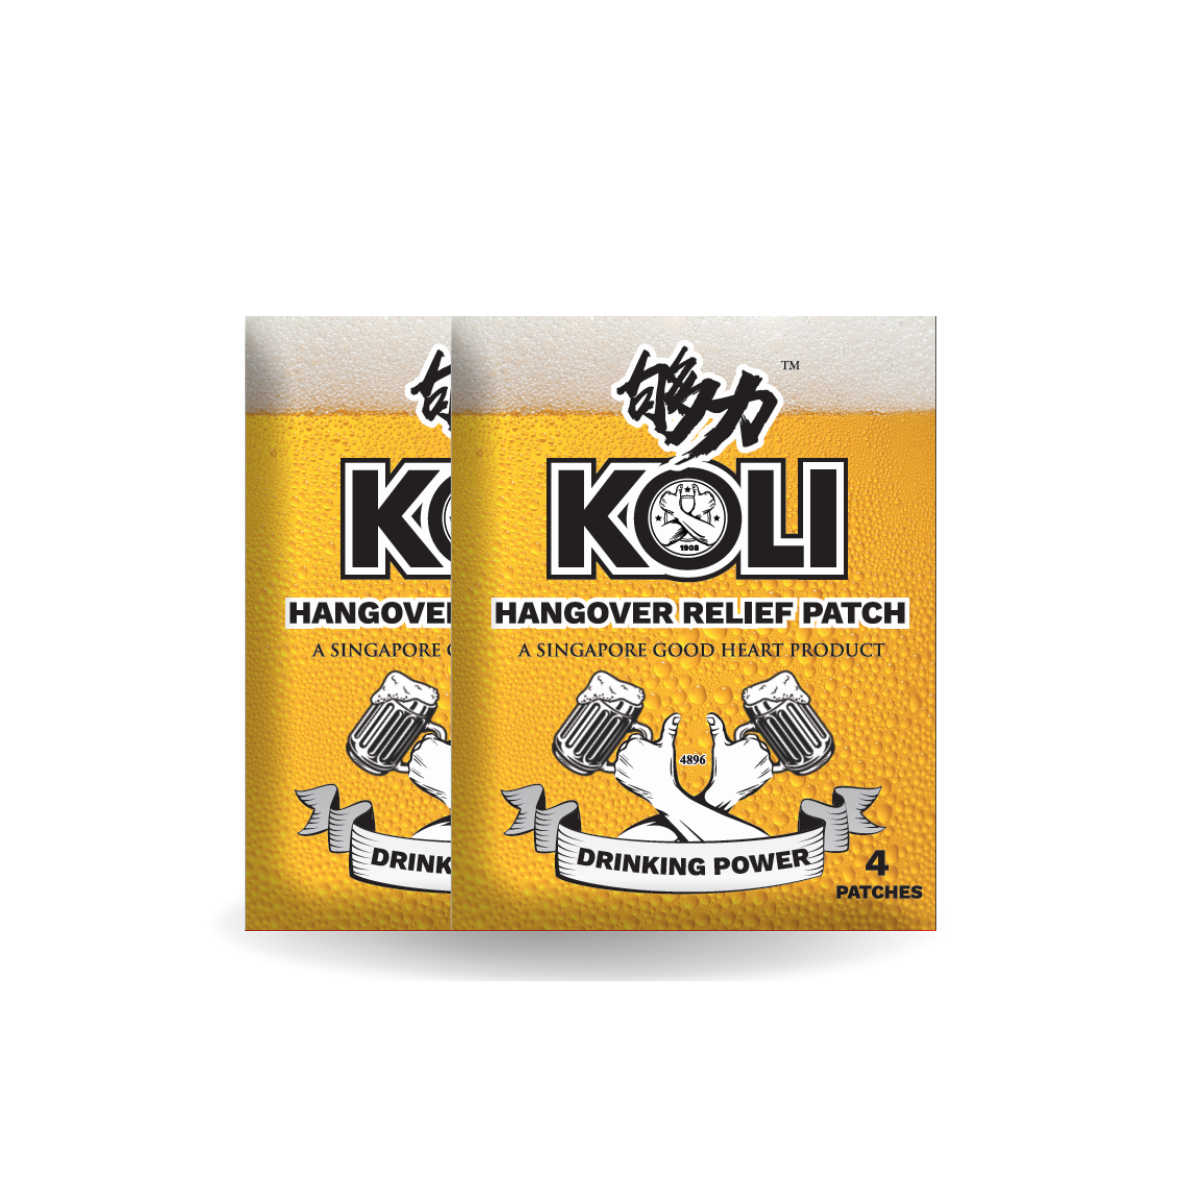 KOLI HANGOVER Relief Patch (DRINKING POWER)